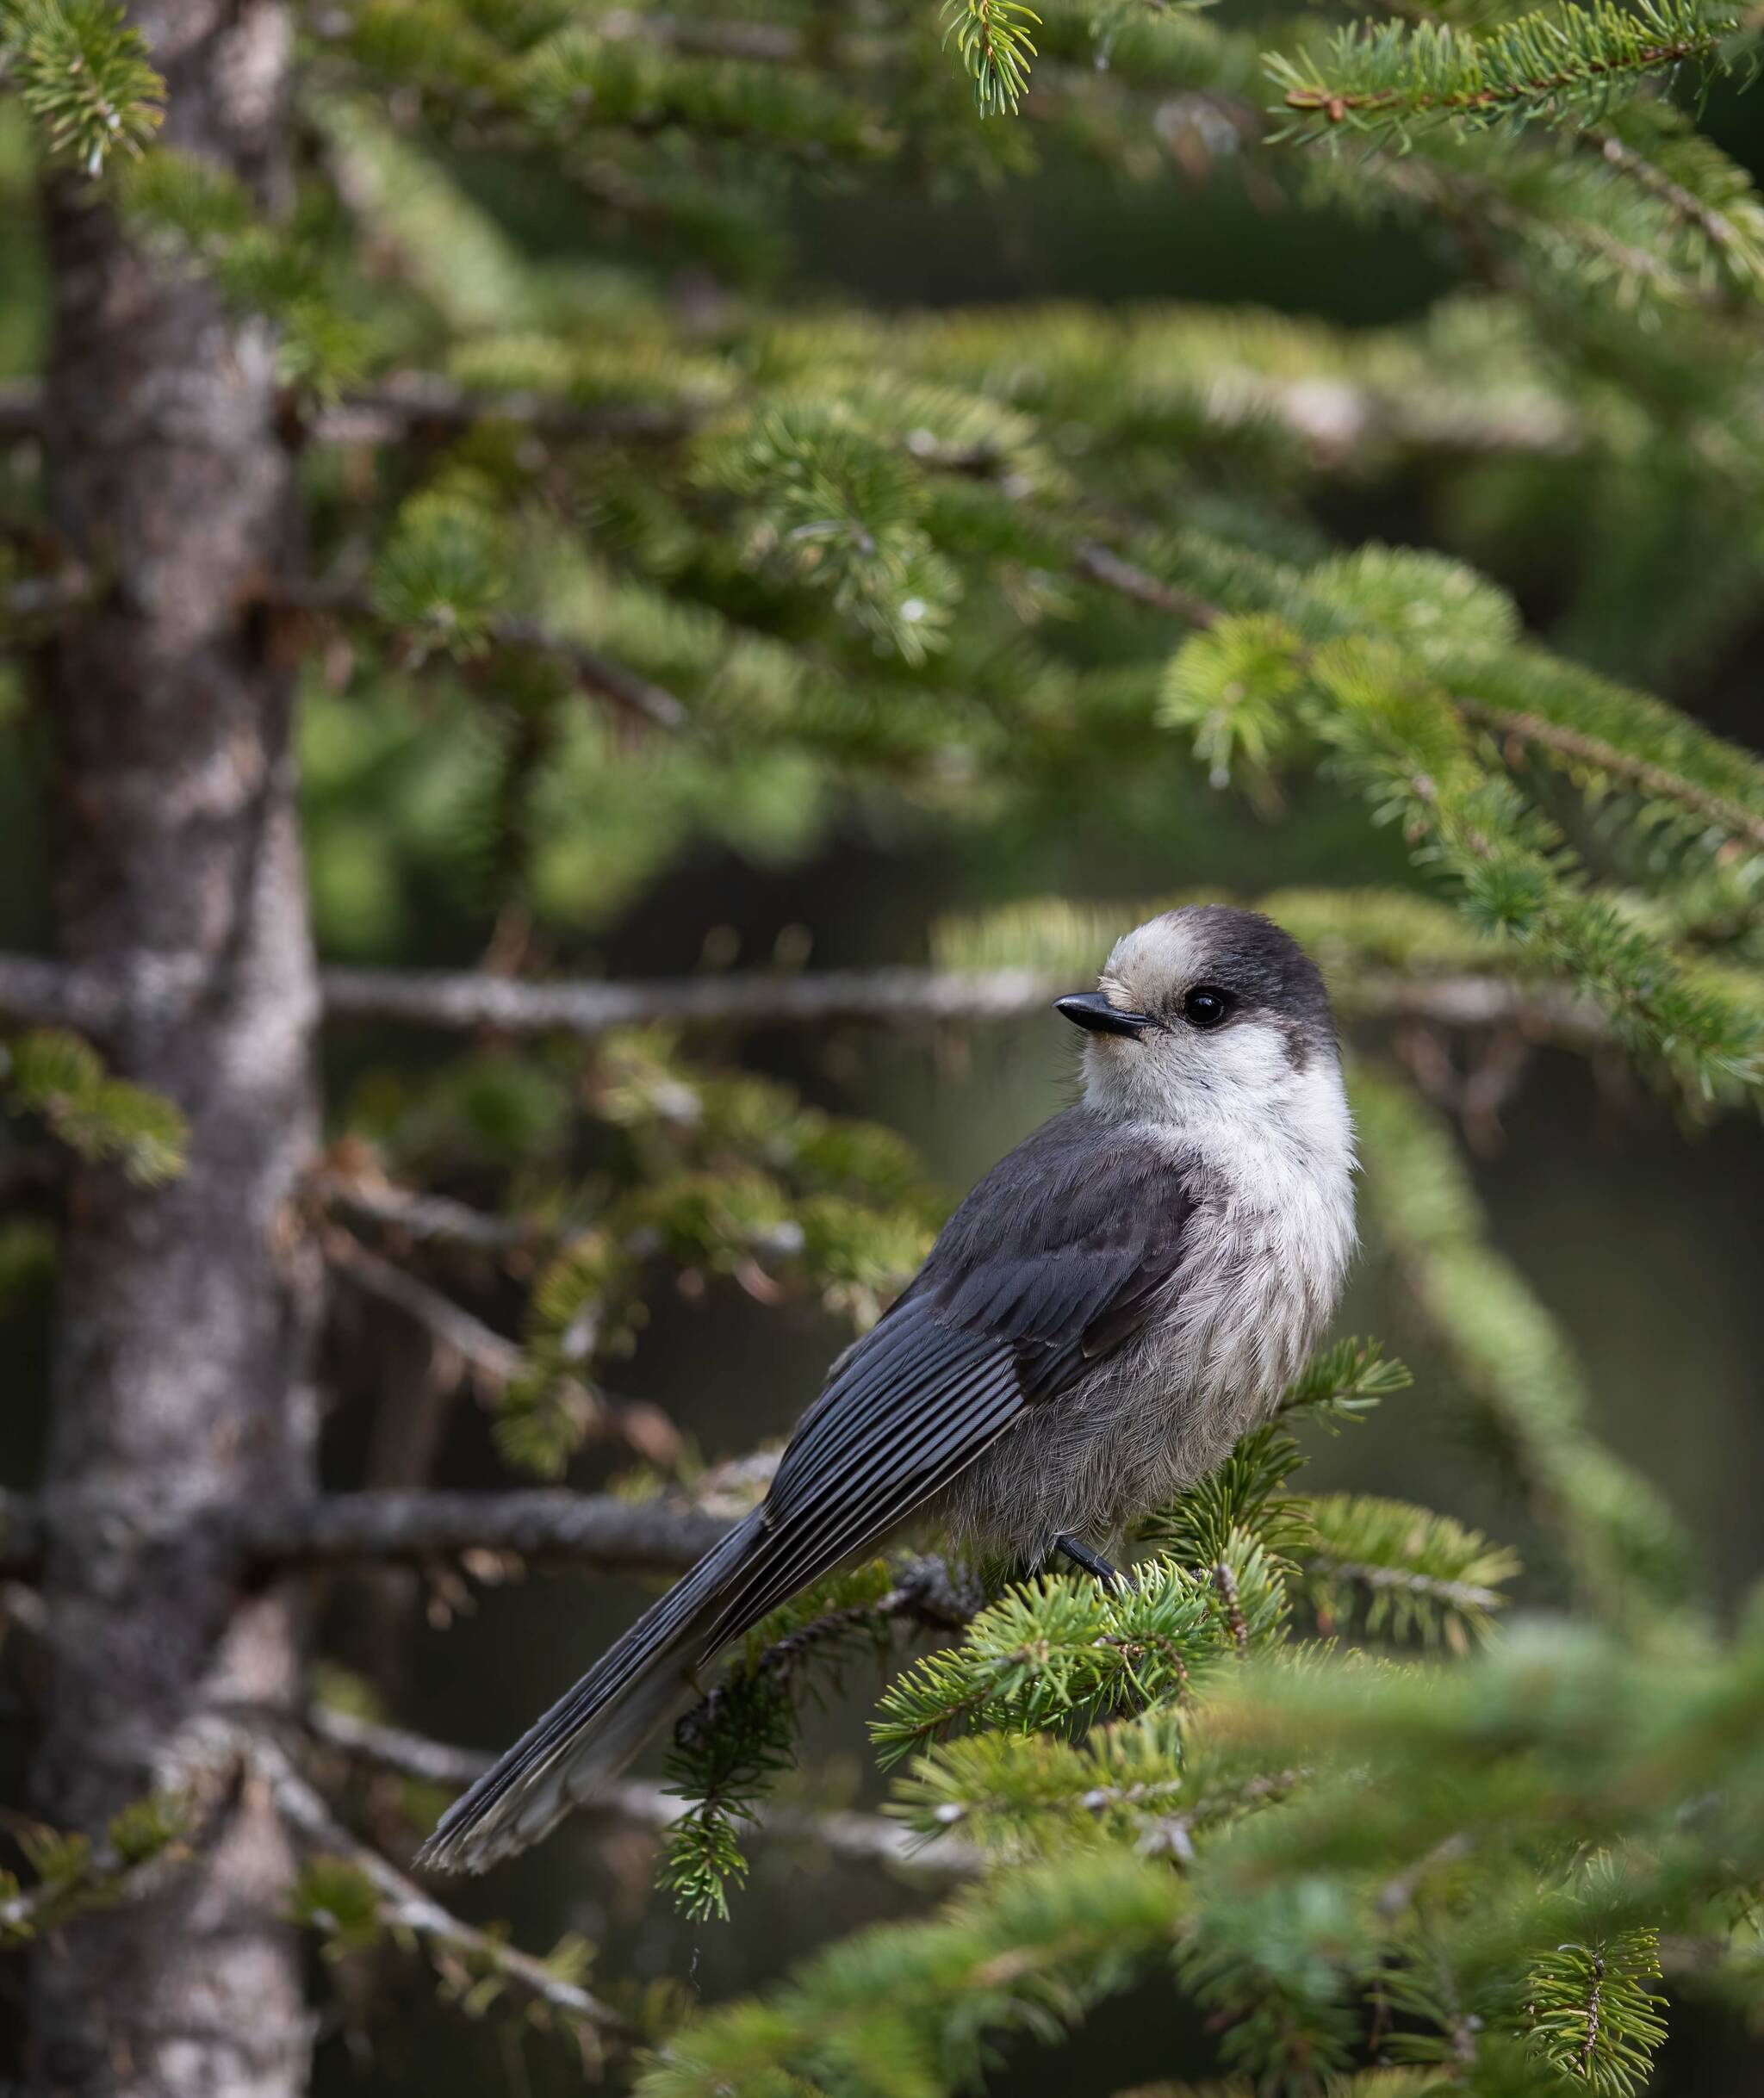 Canada Jay rests in a tree, photo taken off the North Fork Road spring 2022. (Photo by by Joey Hausler/courtesy)